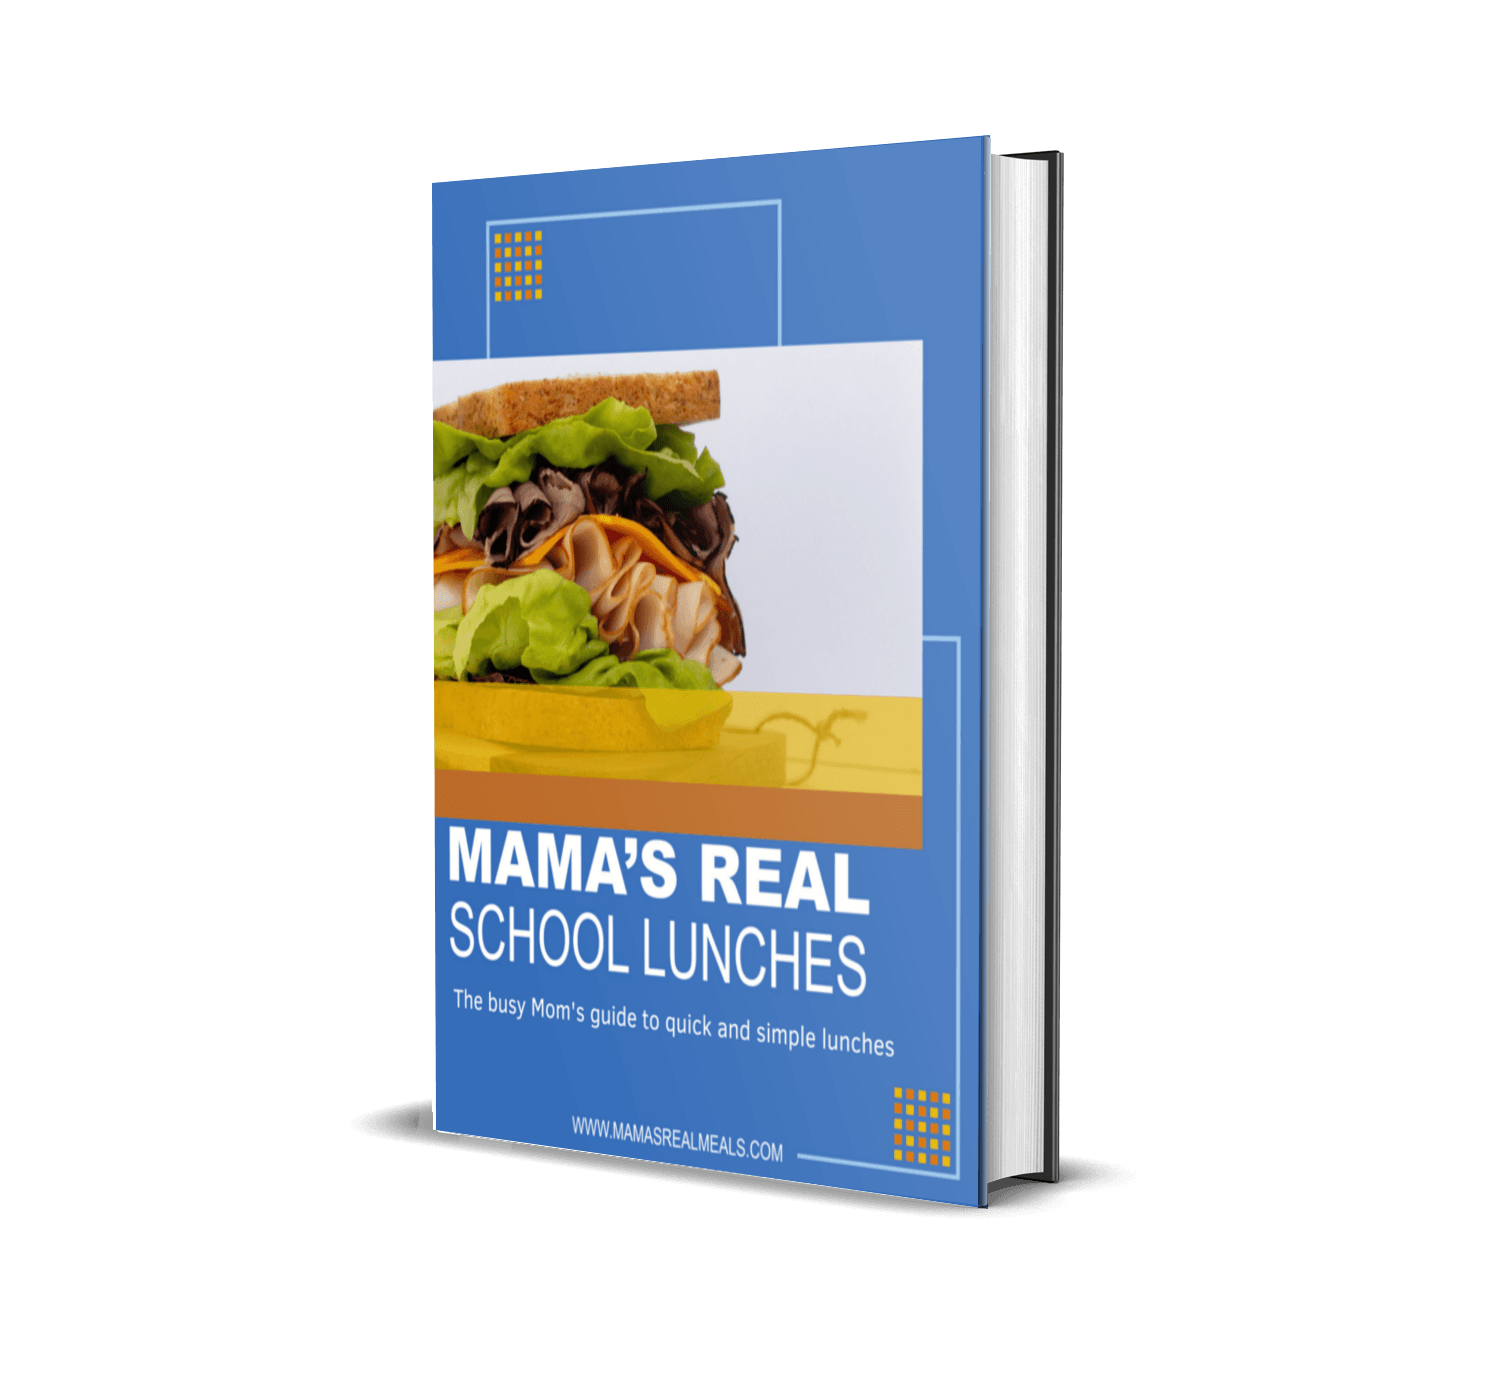 Your Home for God,Mamas-real-lunches-afflink